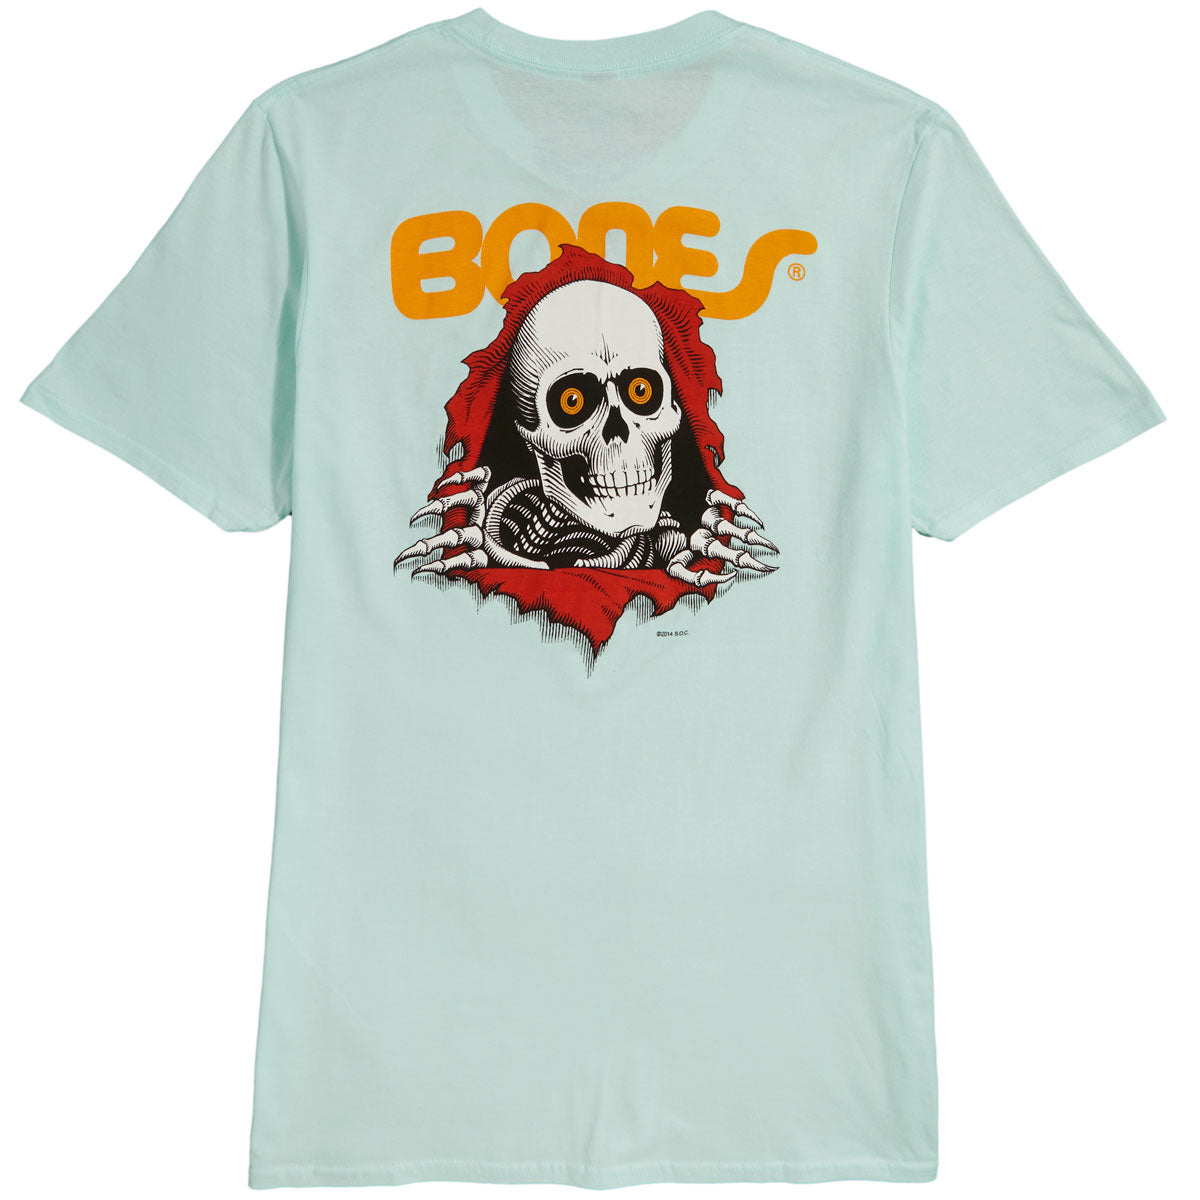 Powell-Peralta Ripper T-Shirt - Teal Ice image 1